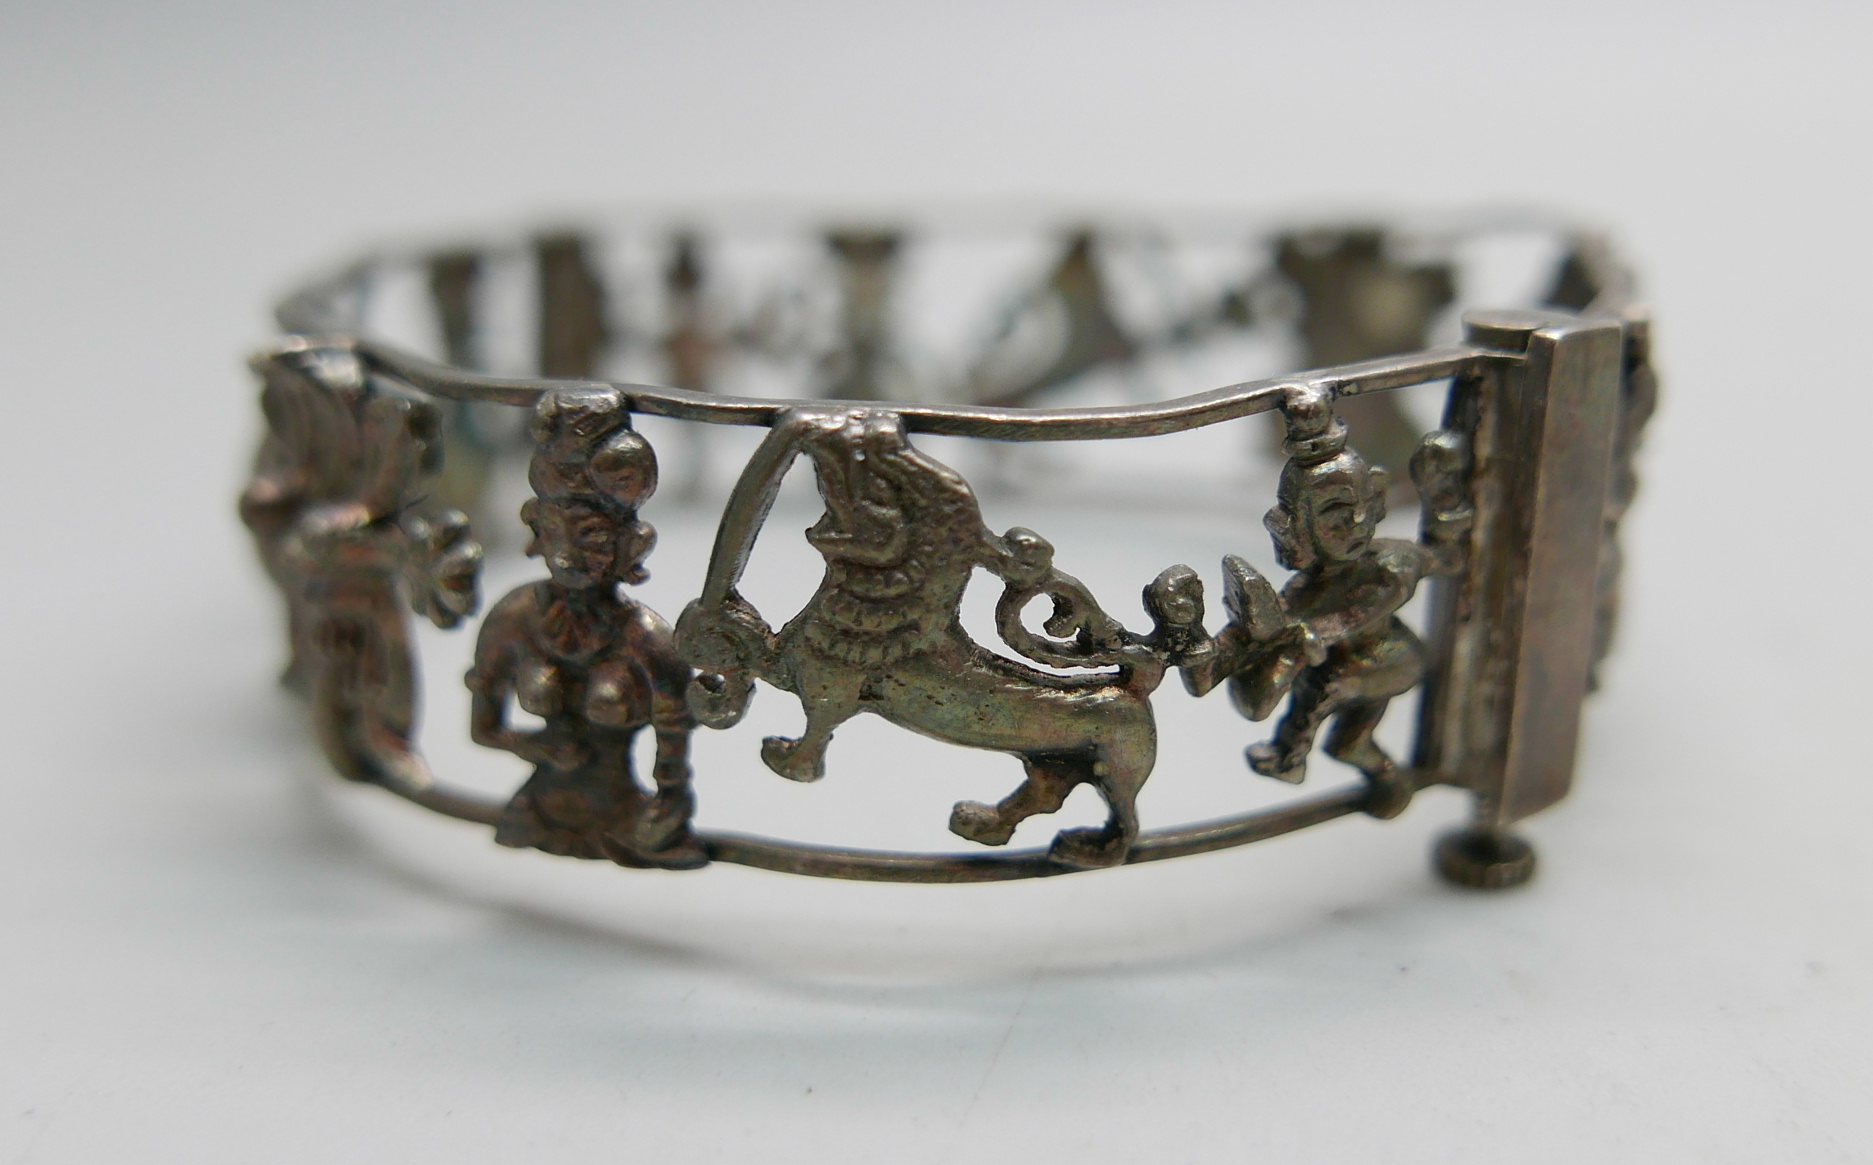 One vintage eastern inspired silver bangle with temples, elephants, etc., and a silver cable - Image 3 of 4